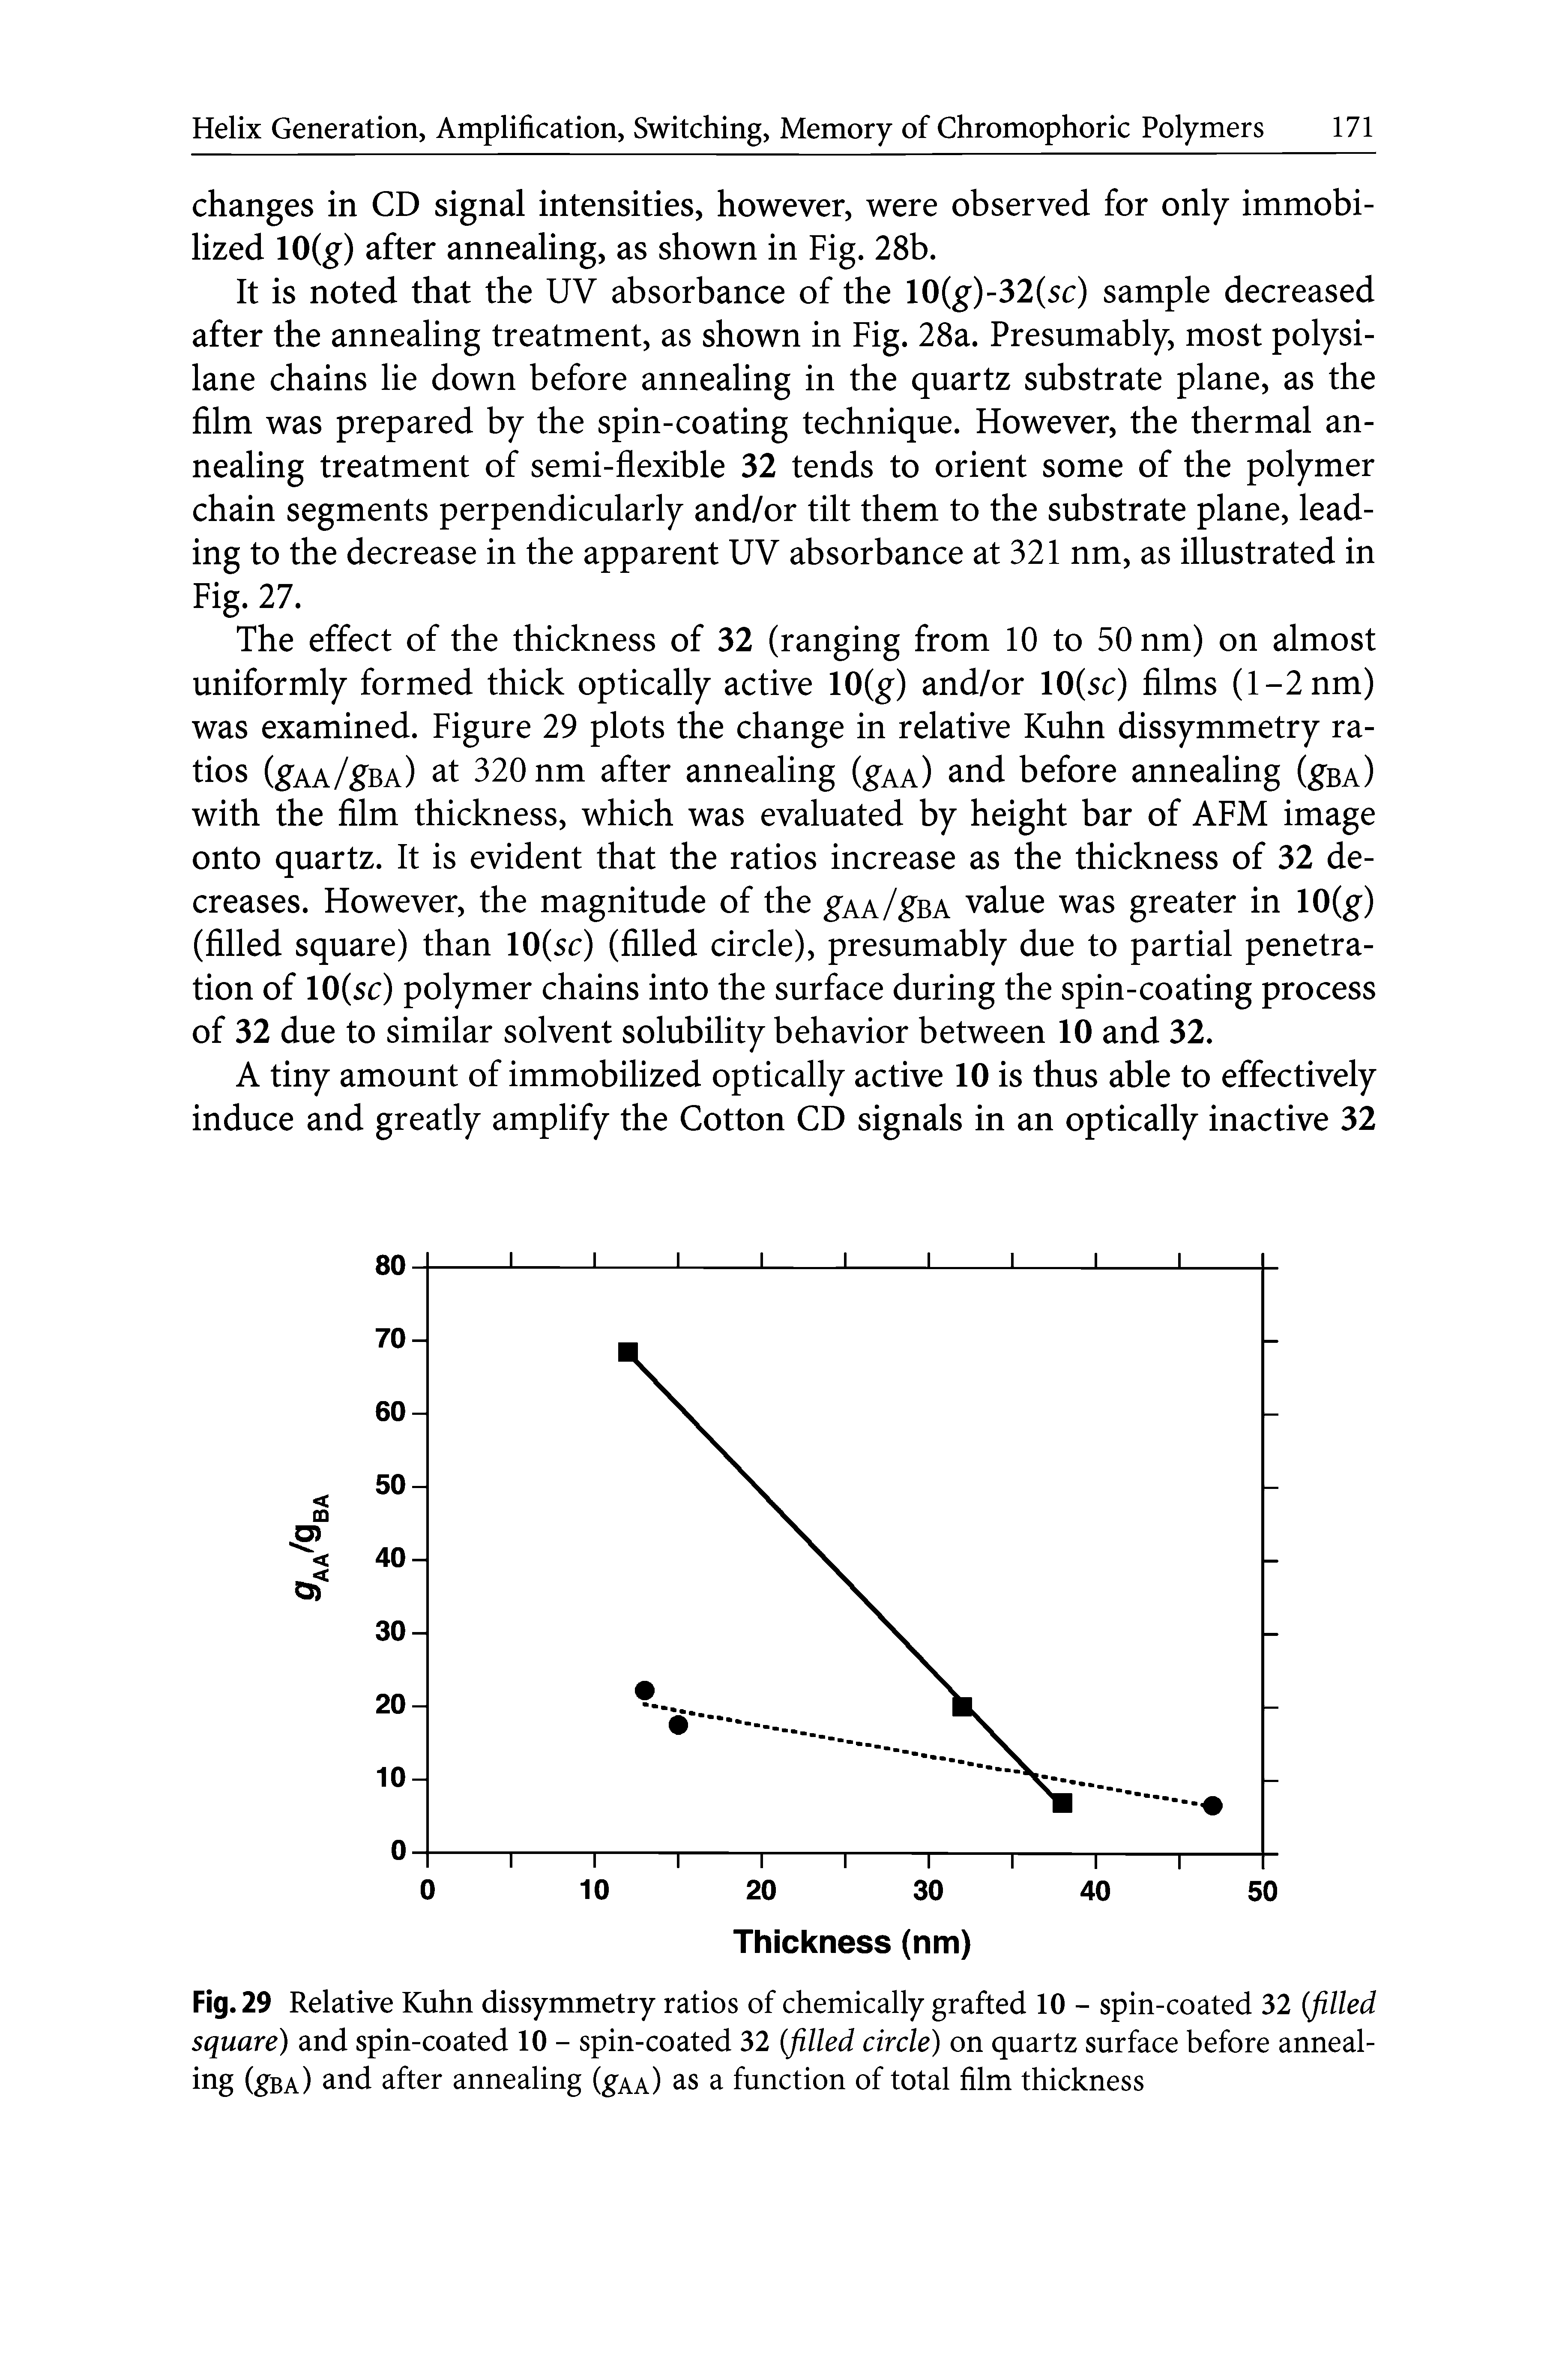 Fig. 29 Relative Kuhn dissymmetry ratios of chemically grafted 10 - spin-coated 32 (filled square) and spin-coated 10 - spin-coated 32 (filled circle) on quartz surface before annealing (gBA) and after annealing (gAA) as a function of total film thickness...